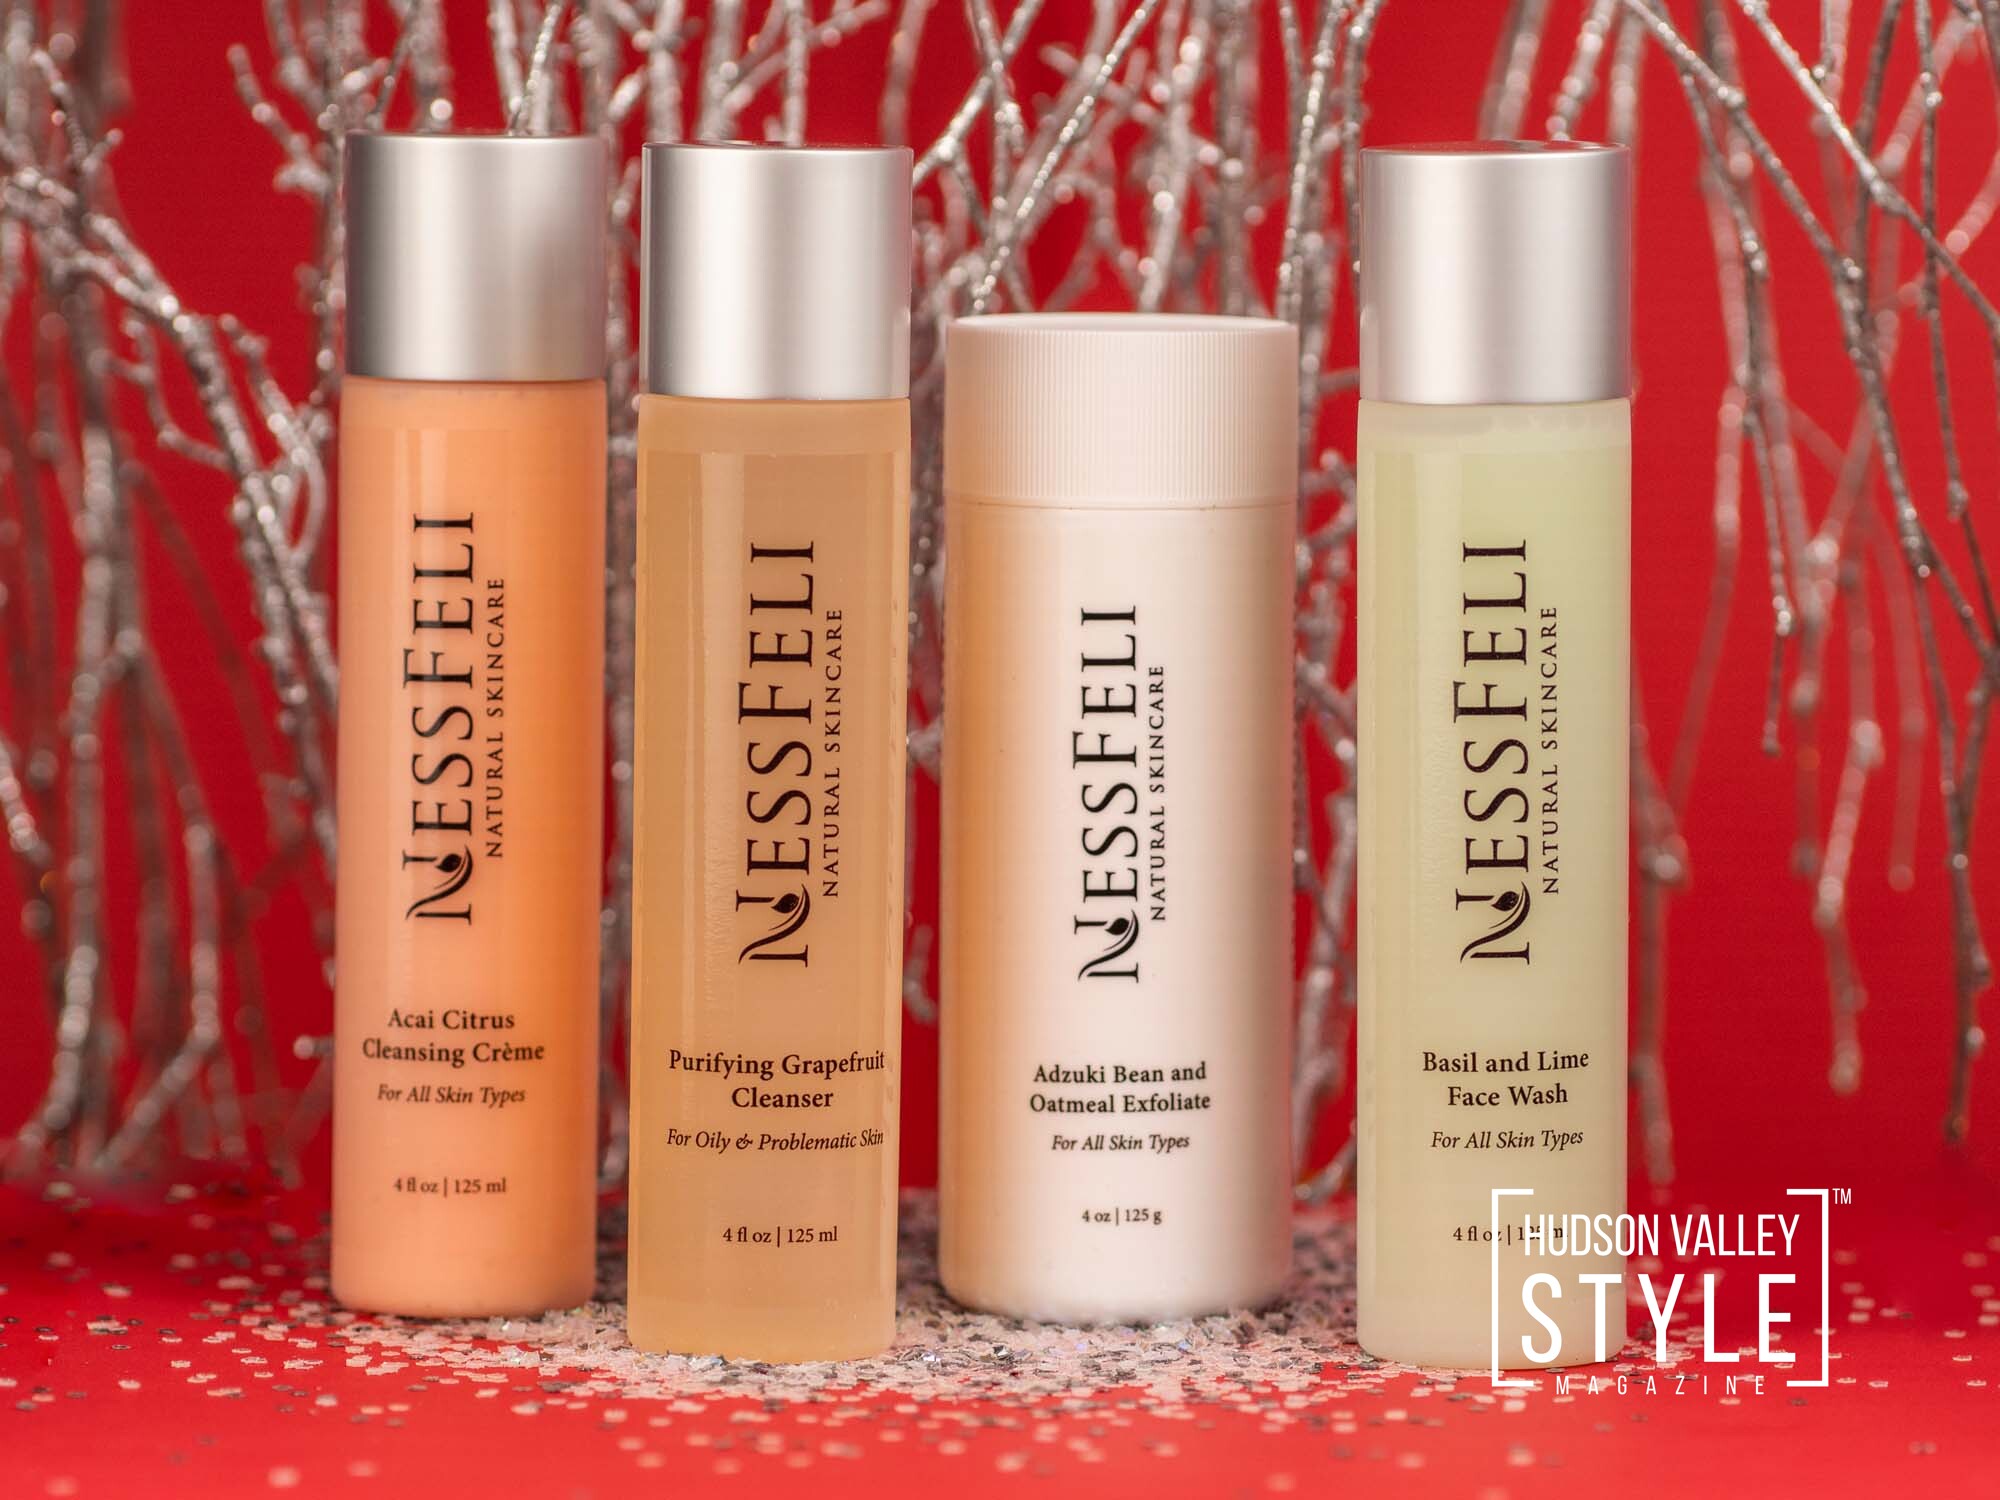 Adzuki Bean and Oatmeal Exfoliate by NessFeli Natural Skincare – Hudson Valley Style Magazine Holiday Gift Guide